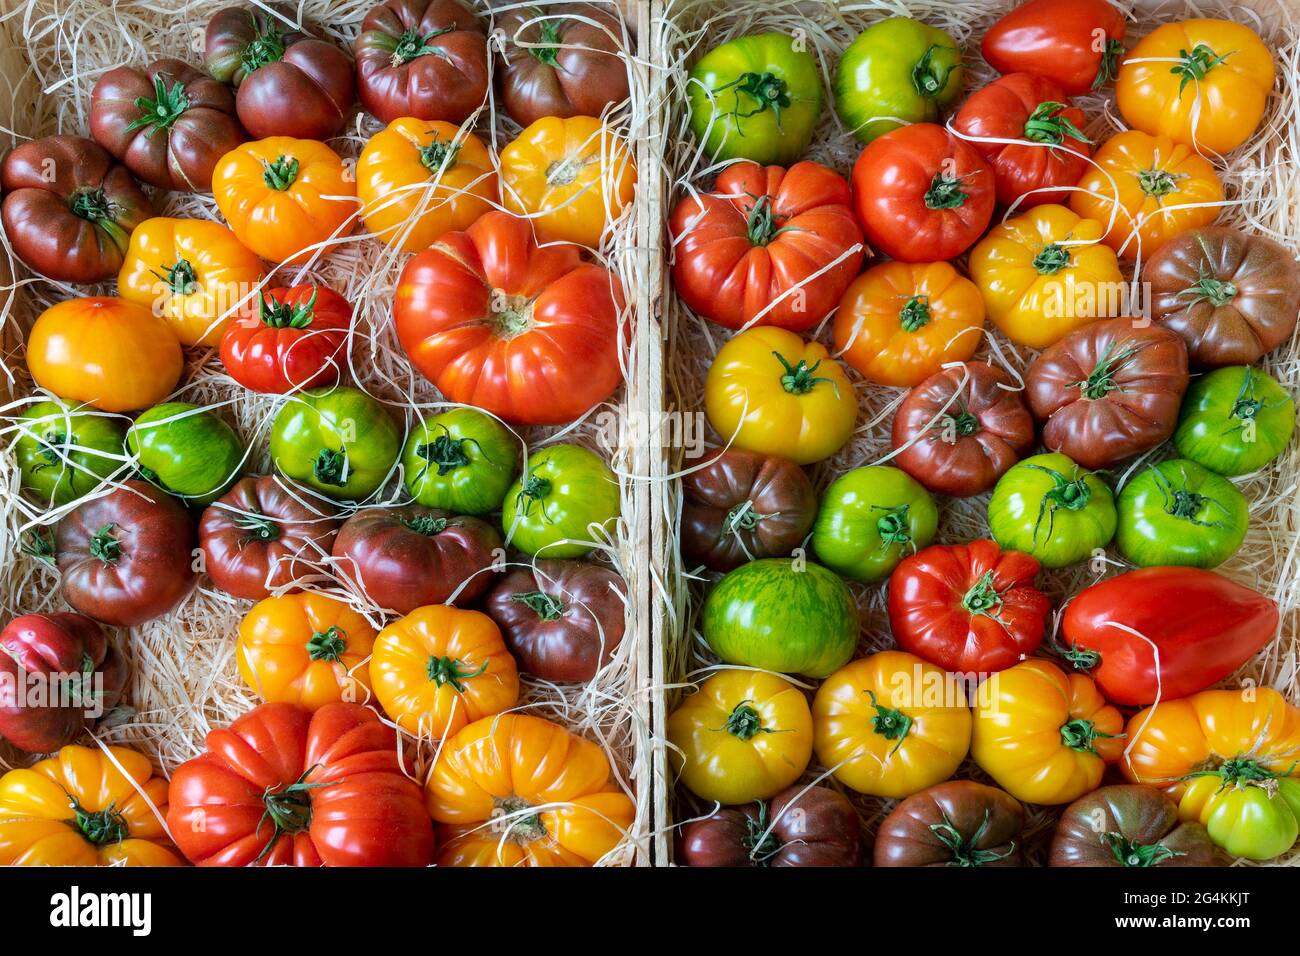 Display of colorful green,red,orange,black ancient species of tomatoes on a market Stock Photo